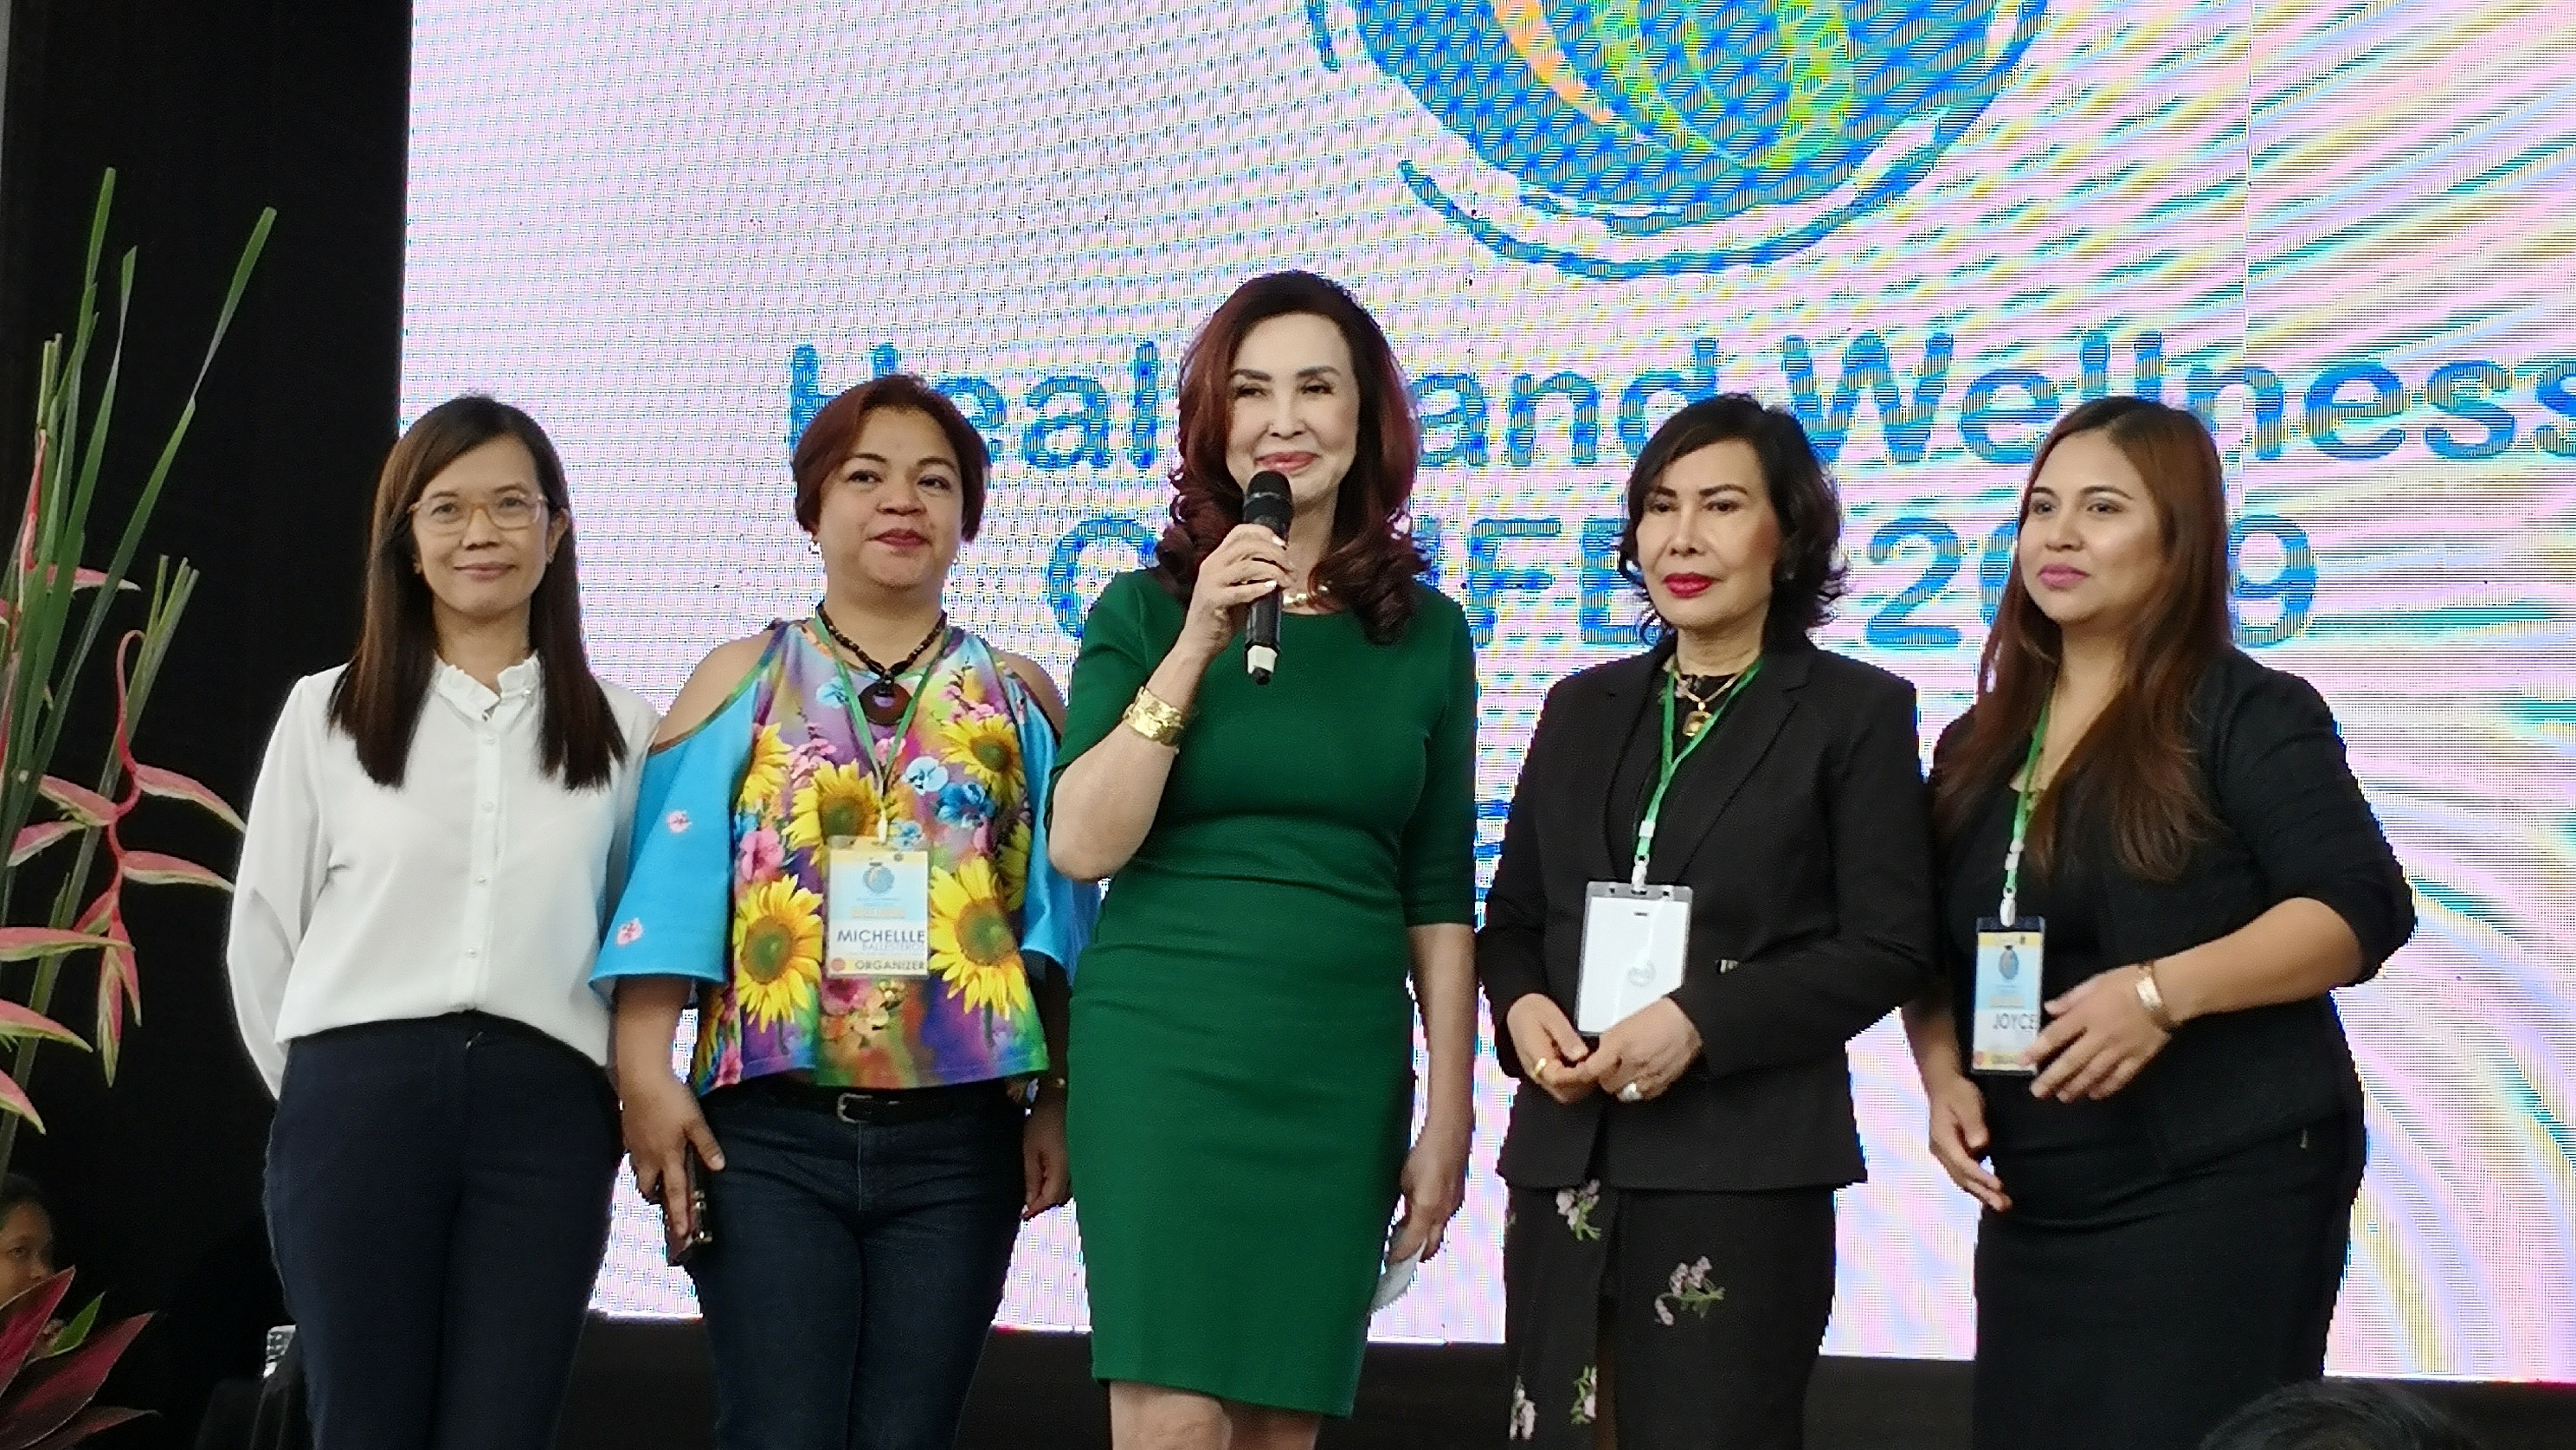 ConfEx 2019 set to help boost health and wellness tourism in the Philippines